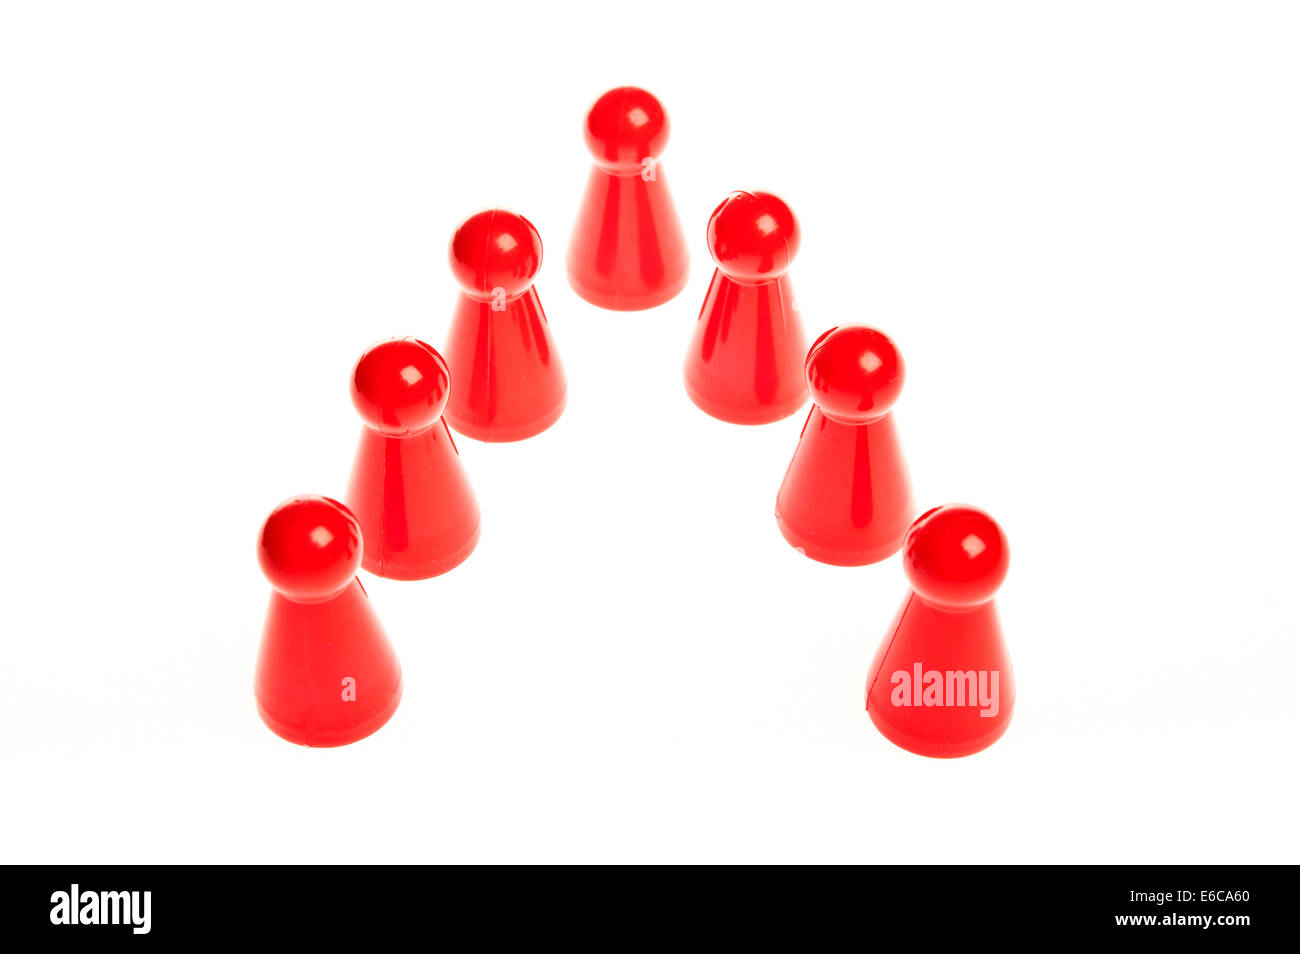 row of seven red counters, teamwork concept Stock Photo